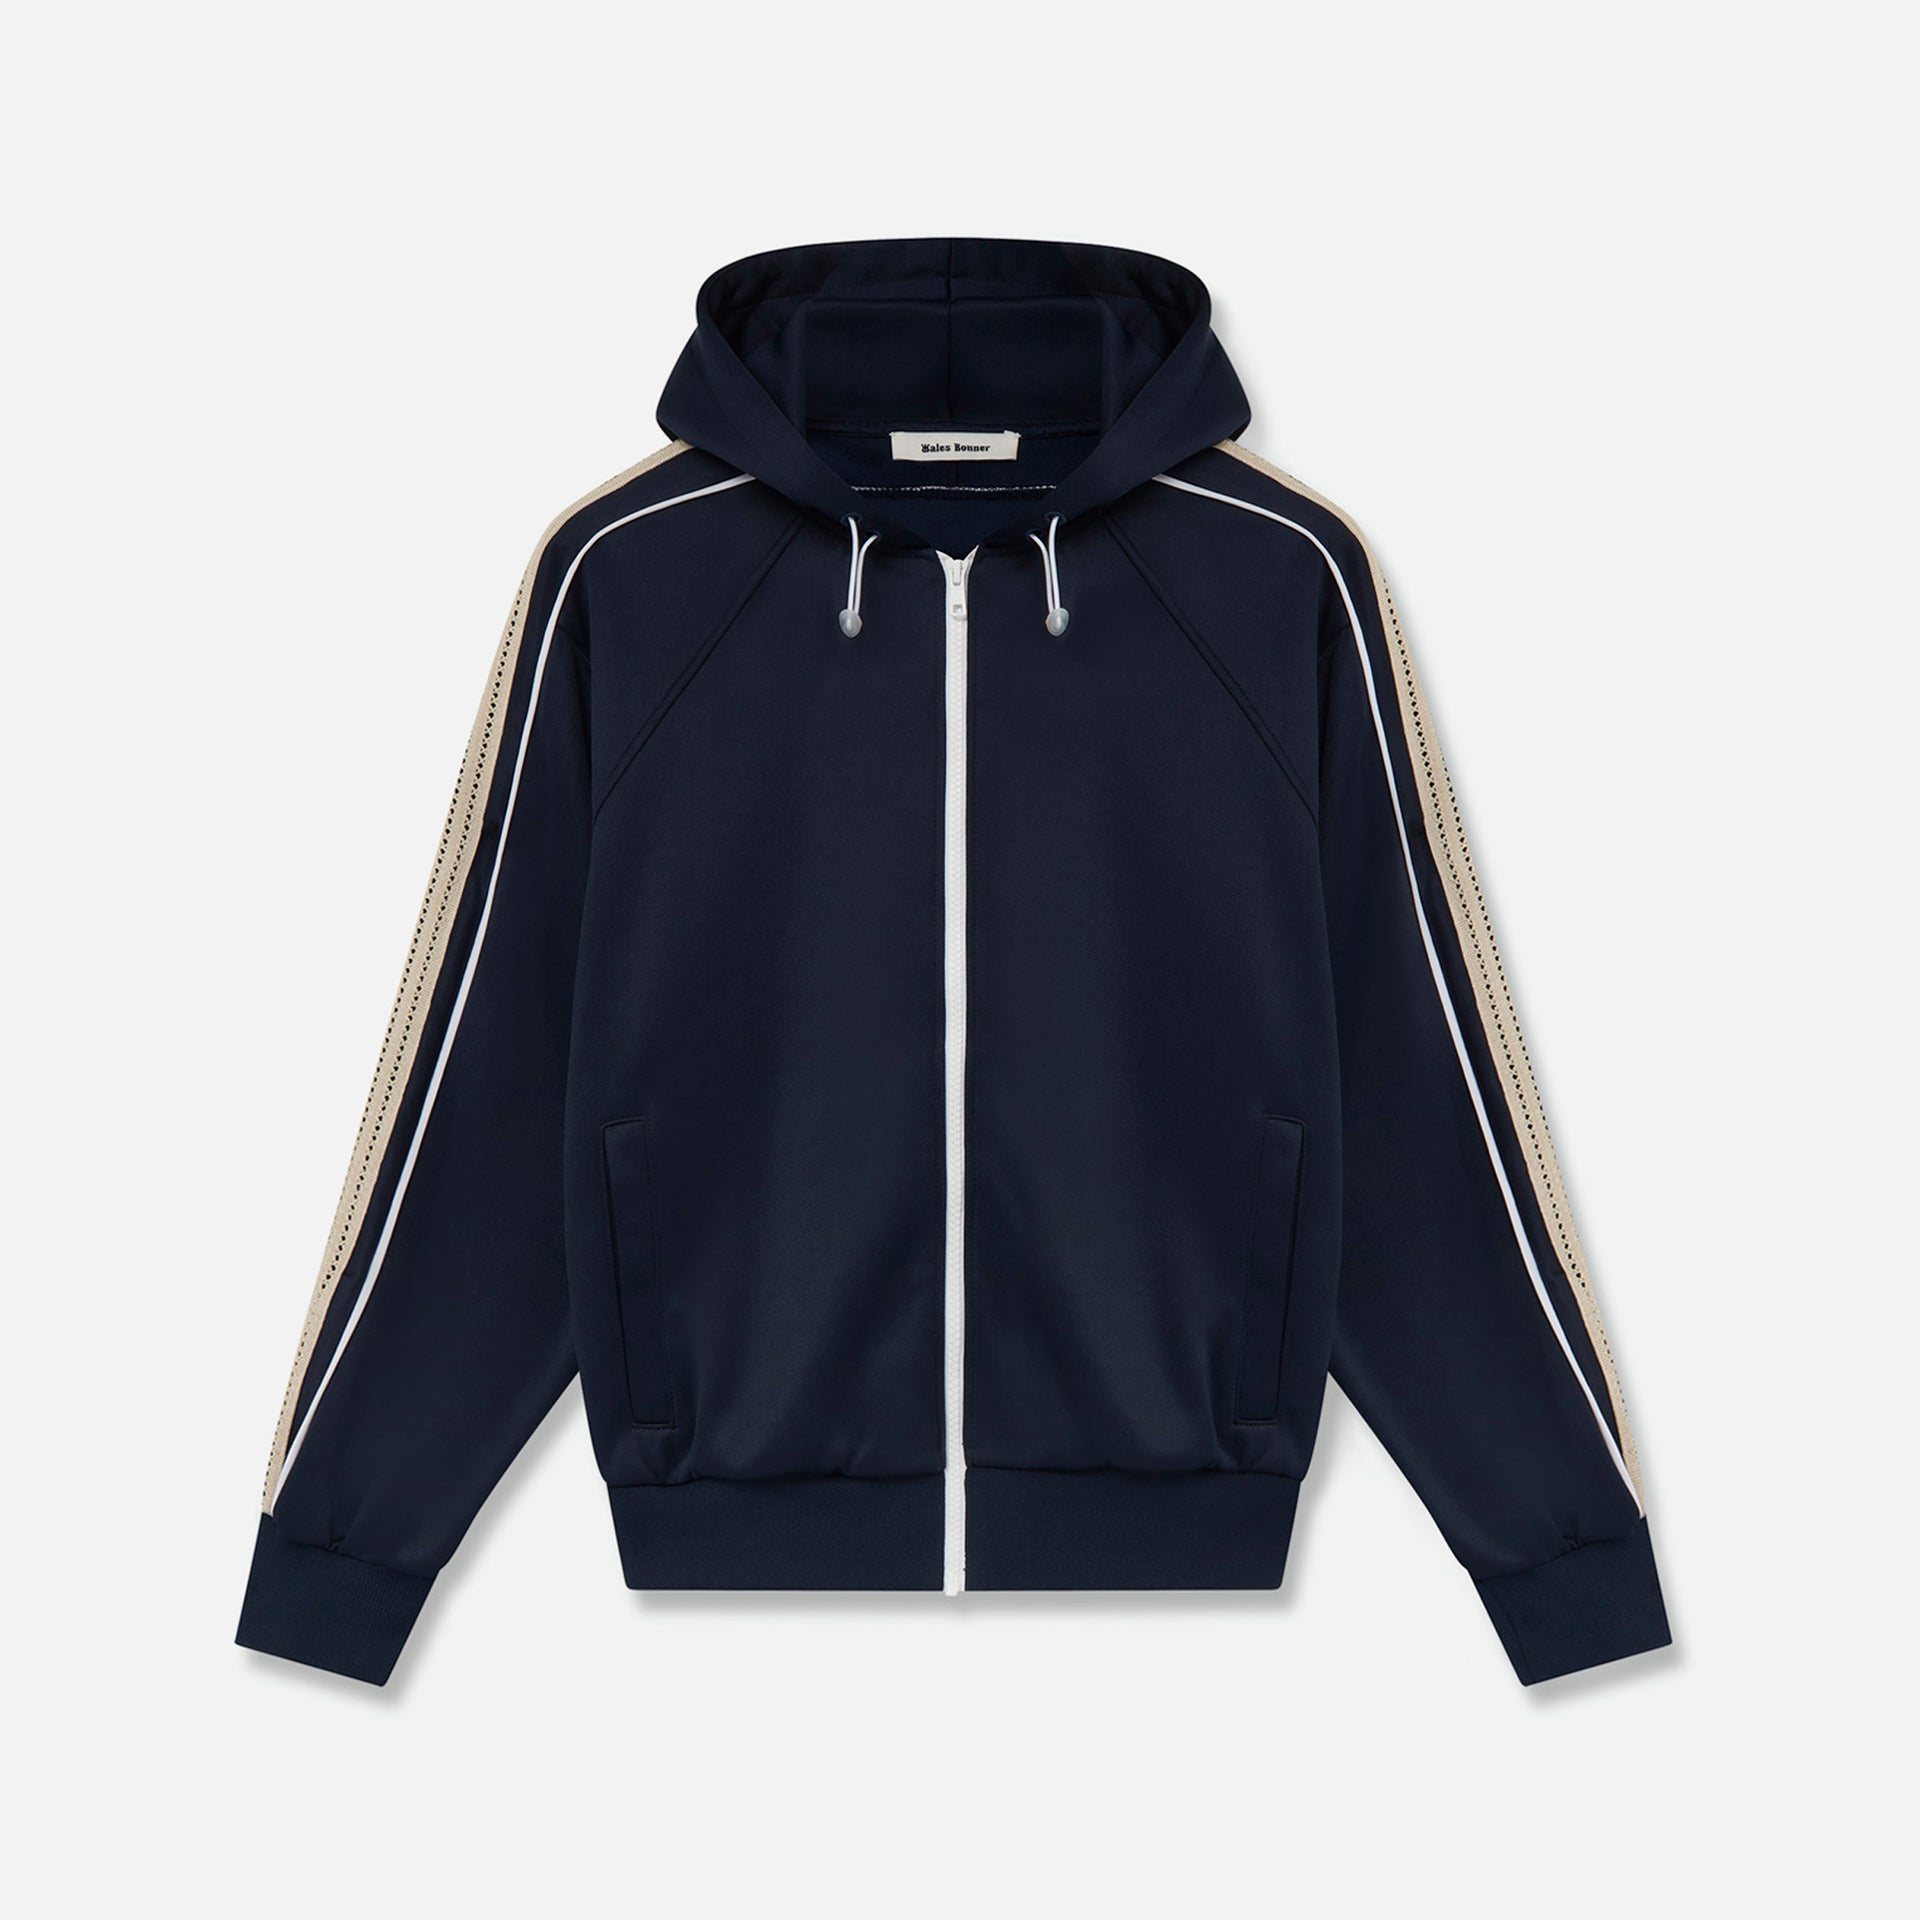 Wales Bonner Mantra Foundation Hoodie - Navy